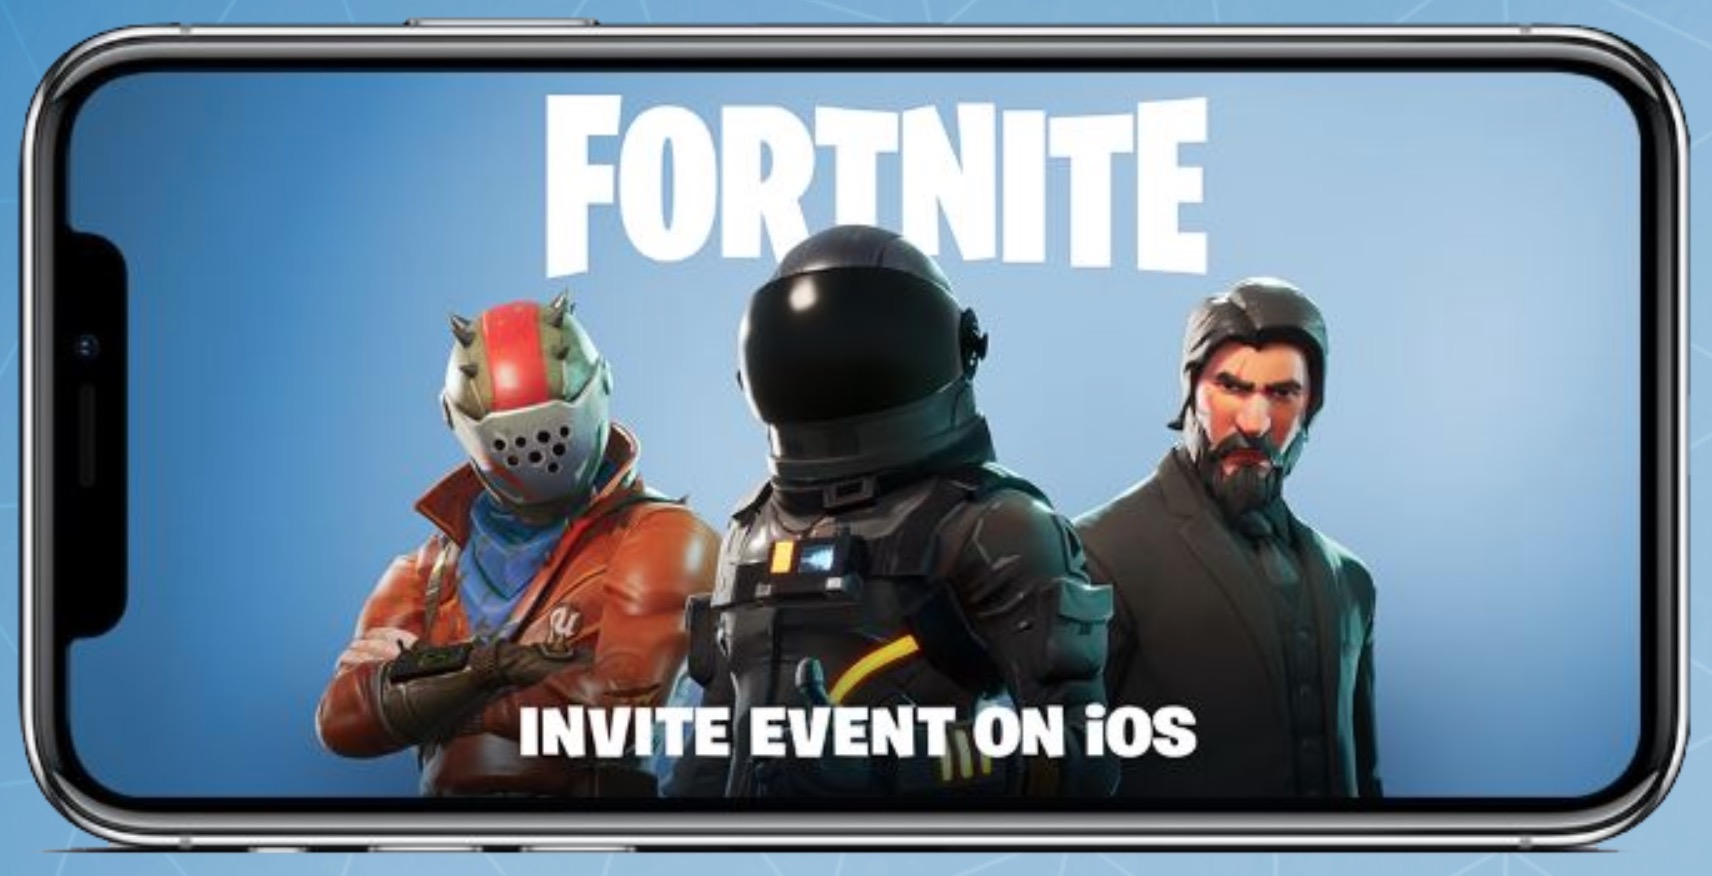 fortnite battle royale now available from app store as first beta invites go out macrumors - igg games fortnite